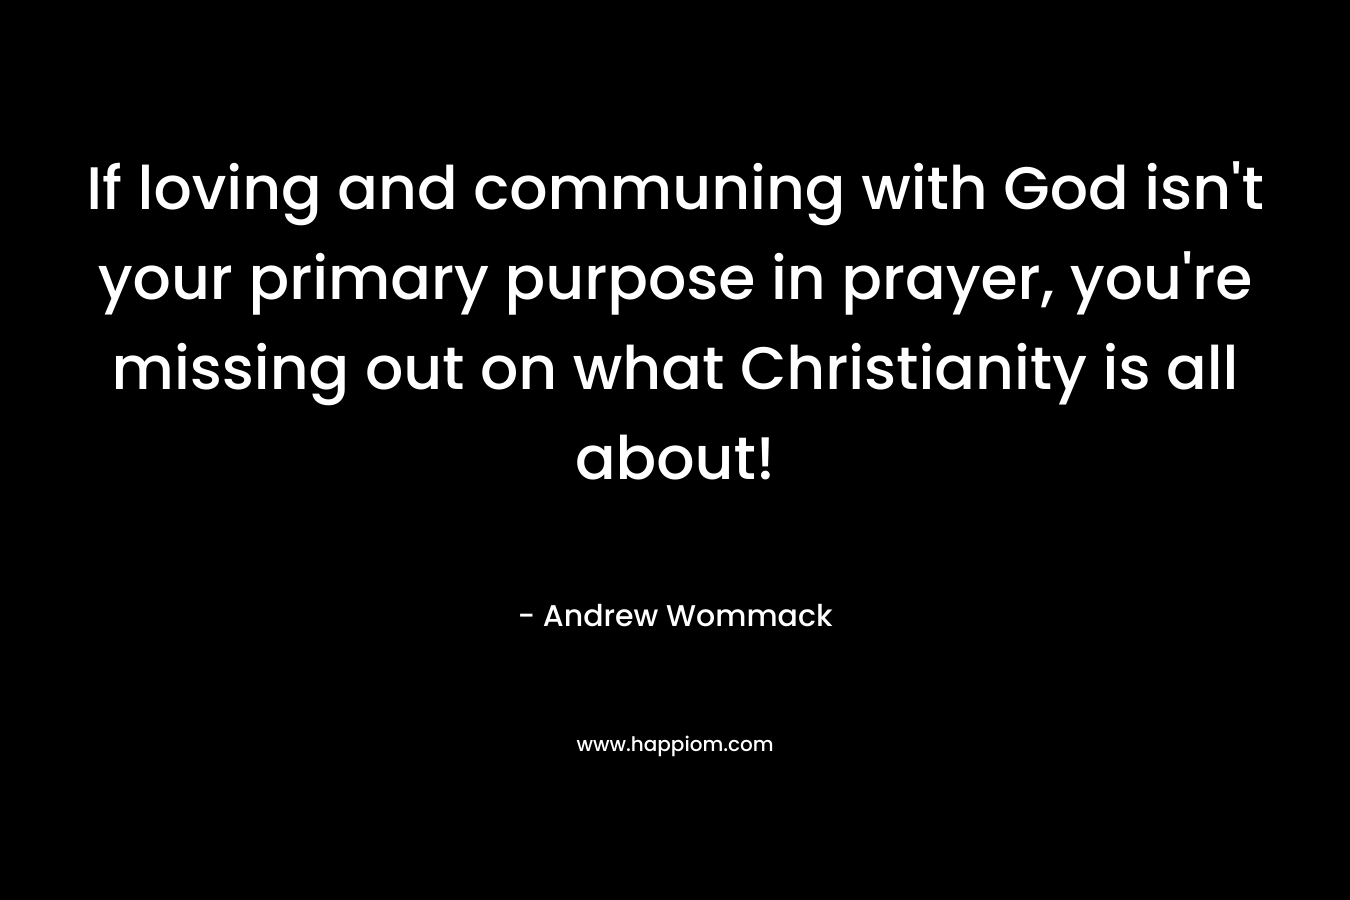 If loving and communing with God isn’t your primary purpose in prayer, you’re missing out on what Christianity is all about! – Andrew Wommack